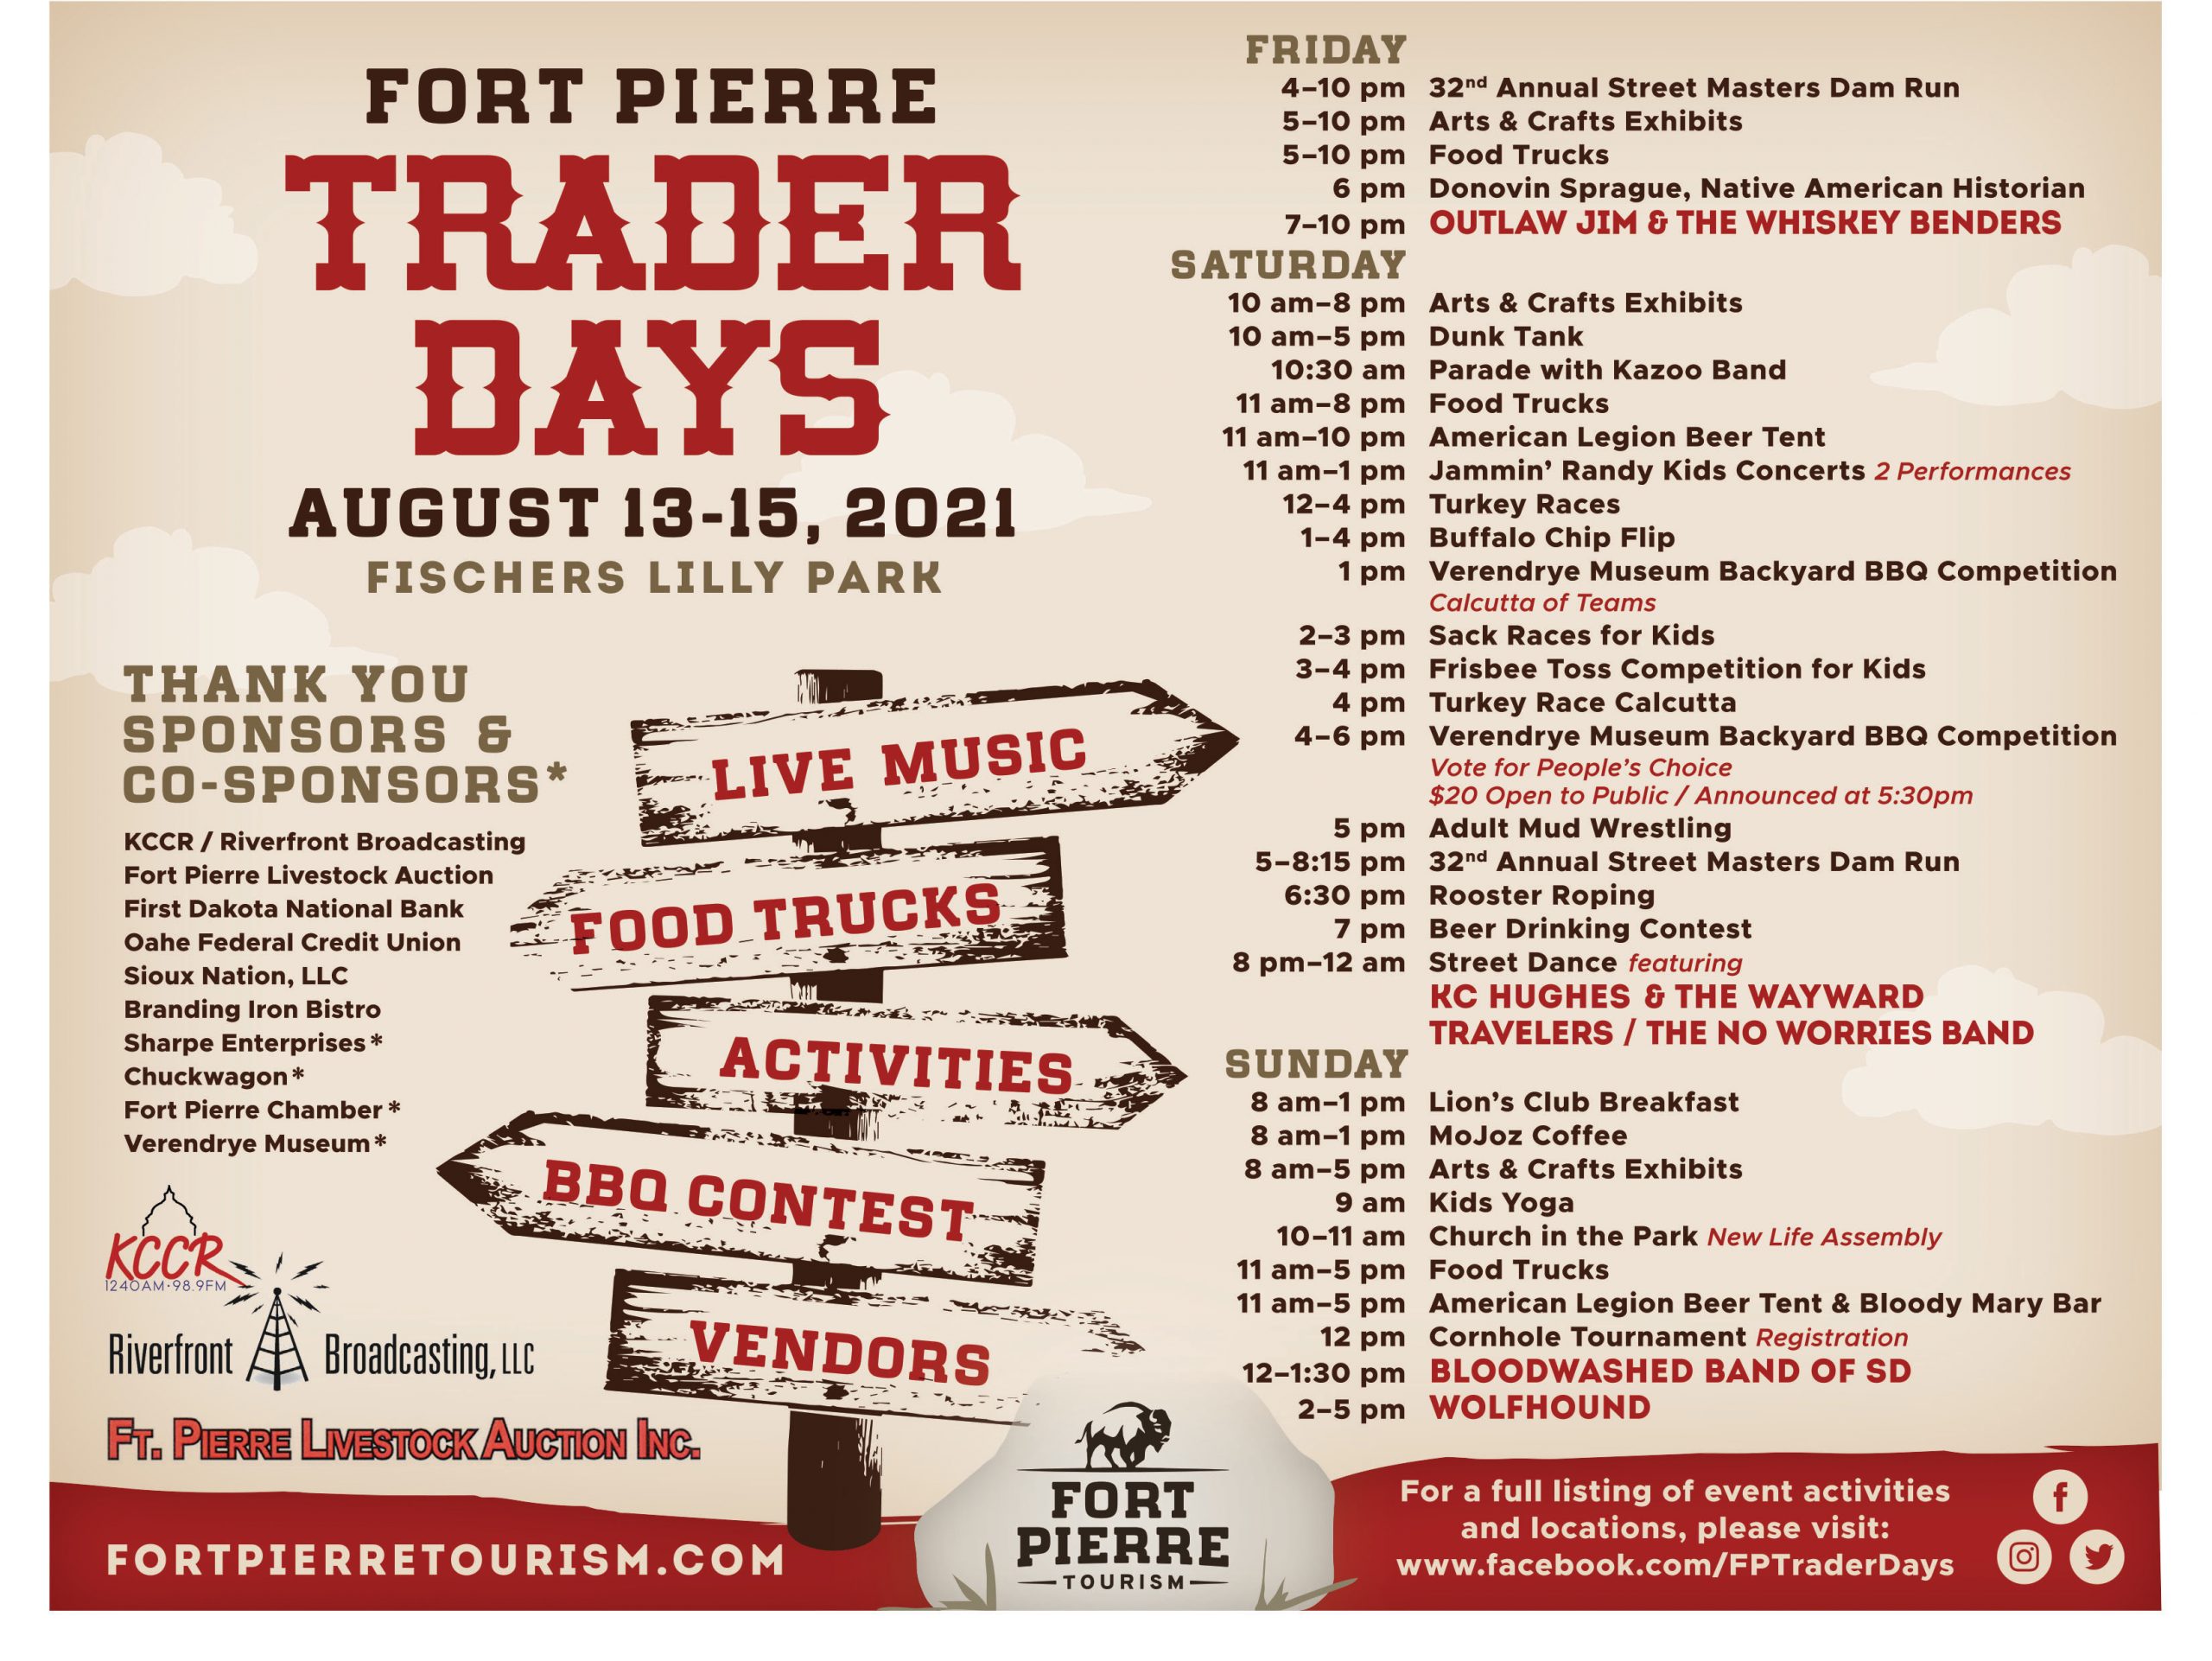 Fort Pierre Trader Days includes rooster roping, turkey races, a kazoo band parade, BBQ